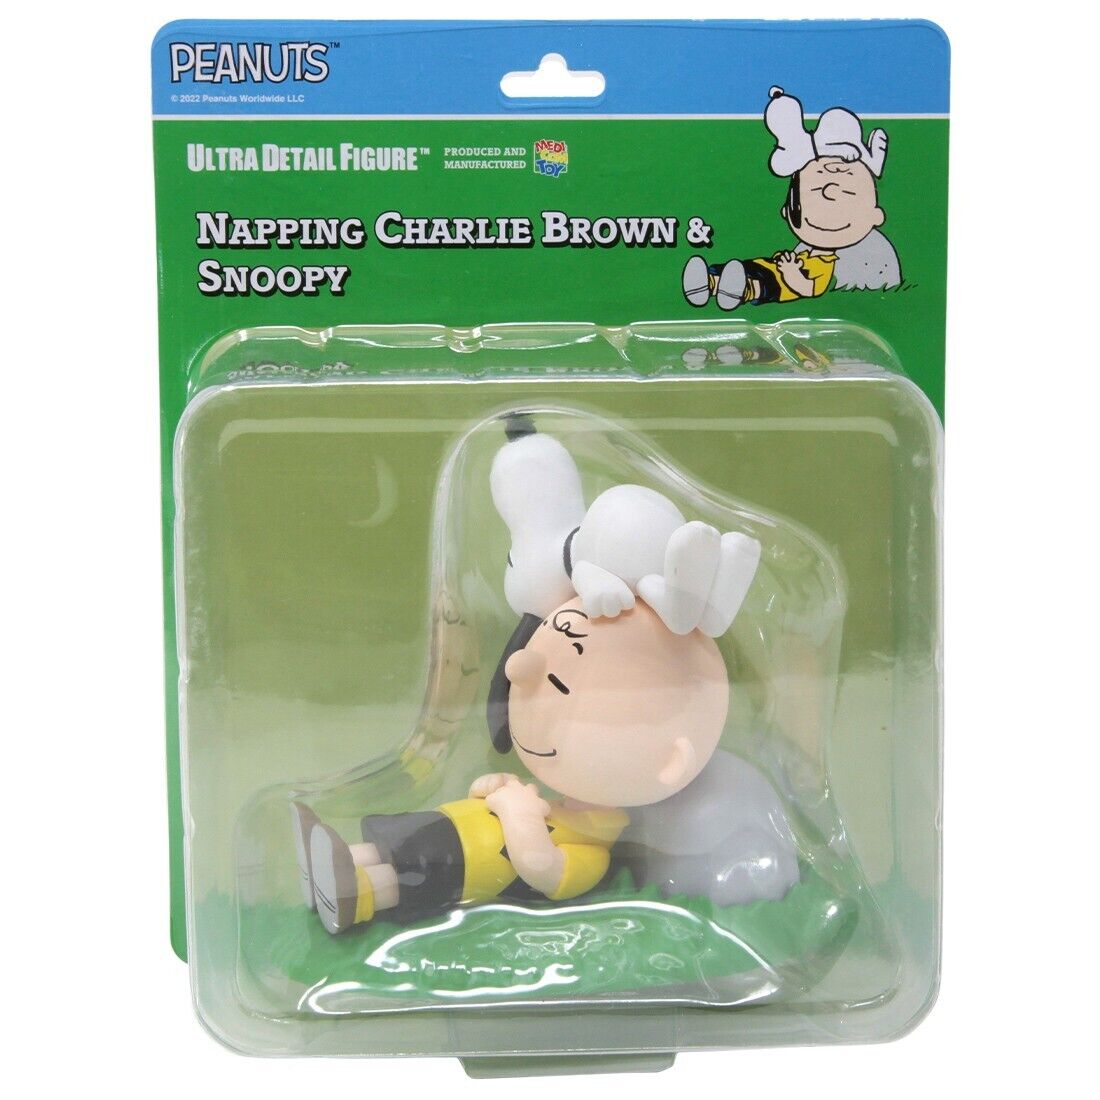 Medicom UDF Peanuts Series 13 Napping Charlie Brown And Snoopy Figure green